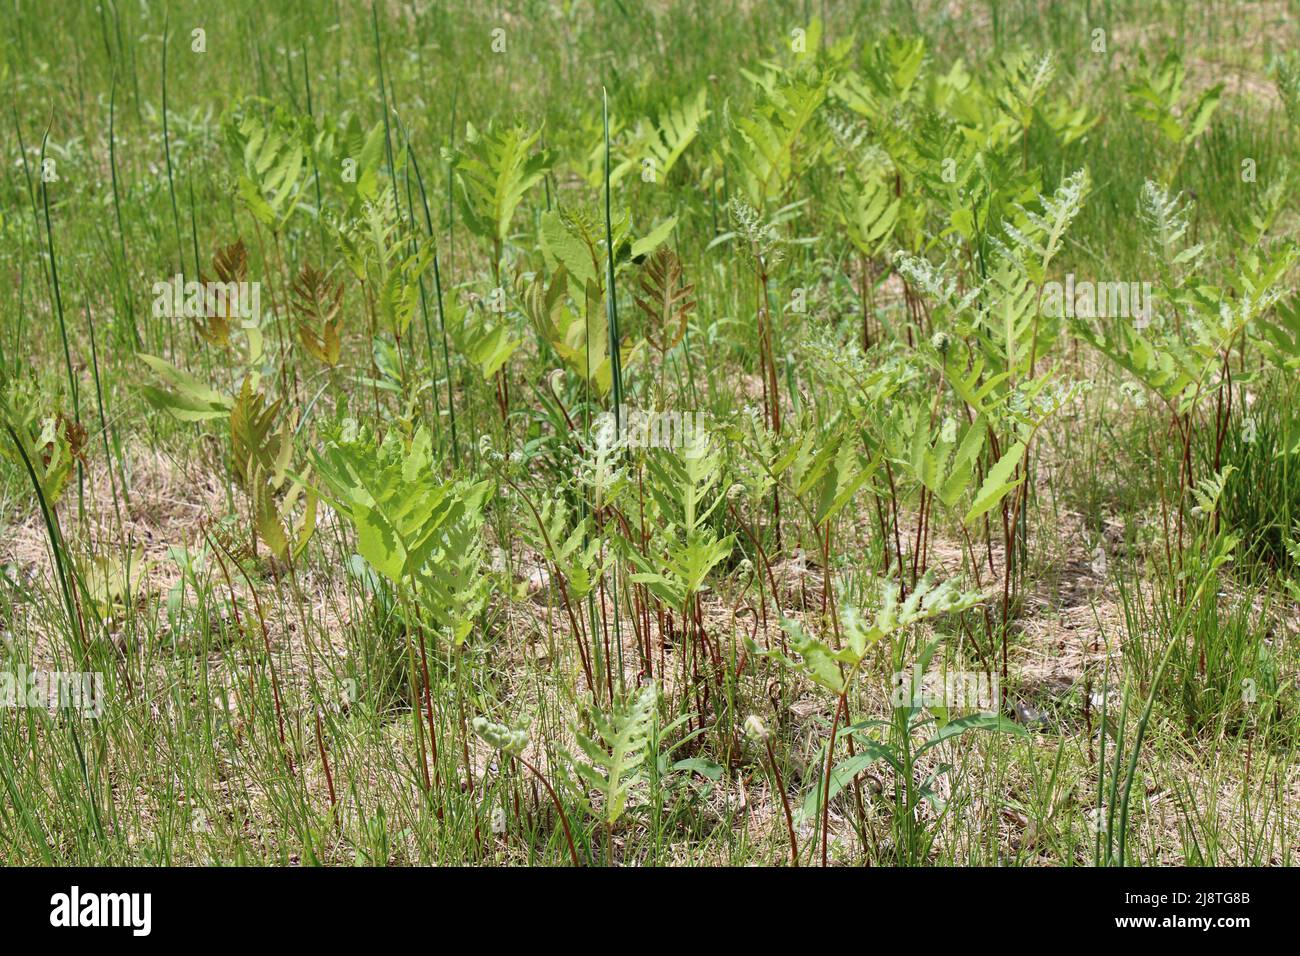 A Side View of Sensitive Ferns in a Grassy Field Stock Photo